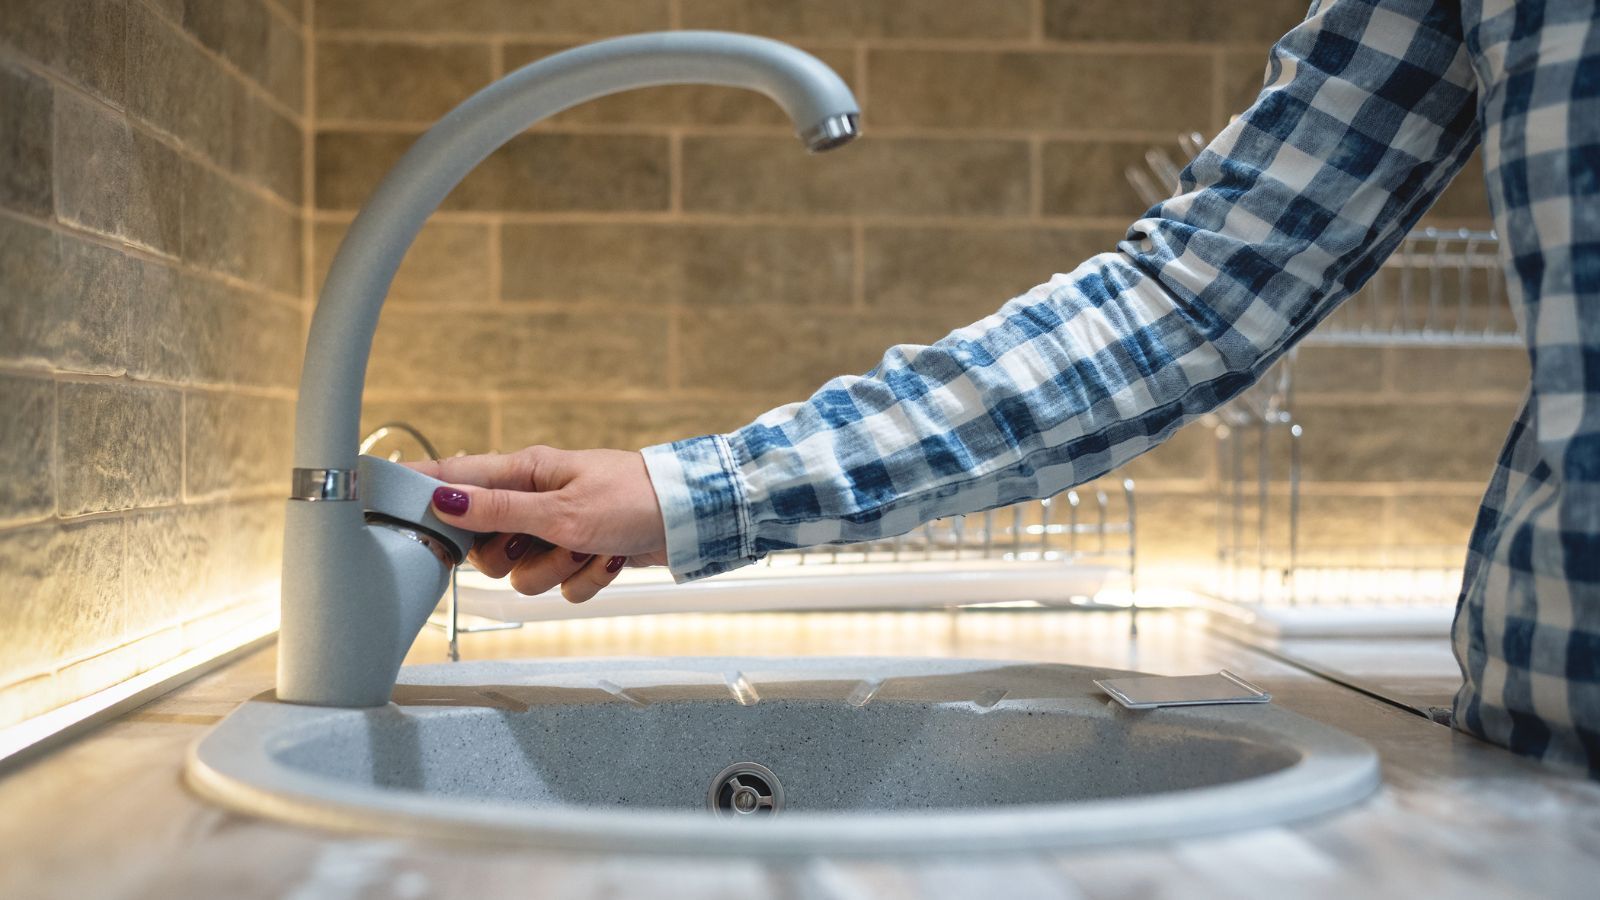 12 Best Faucet Brands for Kitchens & Bathrooms